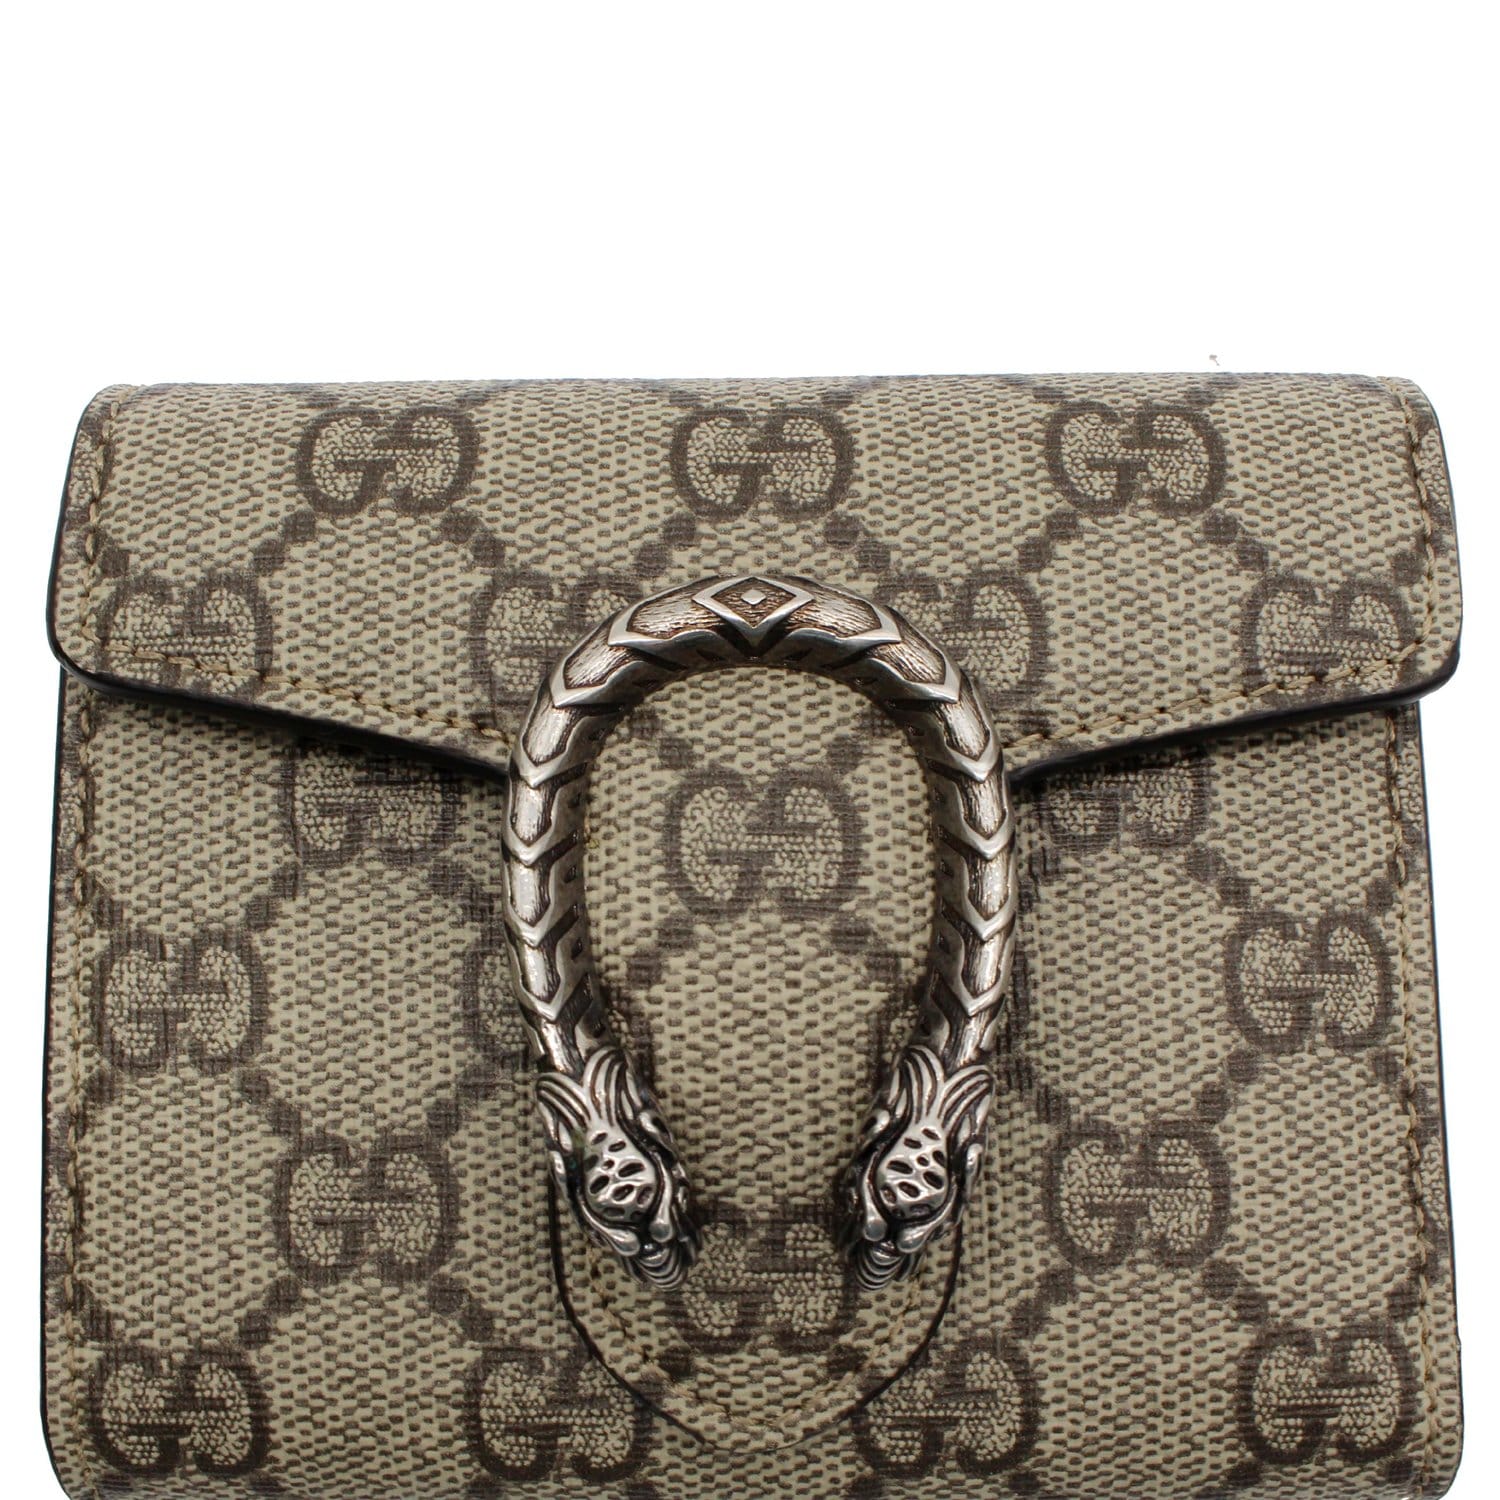 Gucci, Bags, New Gucci Gg Supreme Monogram Blooms Wallet On Chain Card  Case Key Zip Pouch